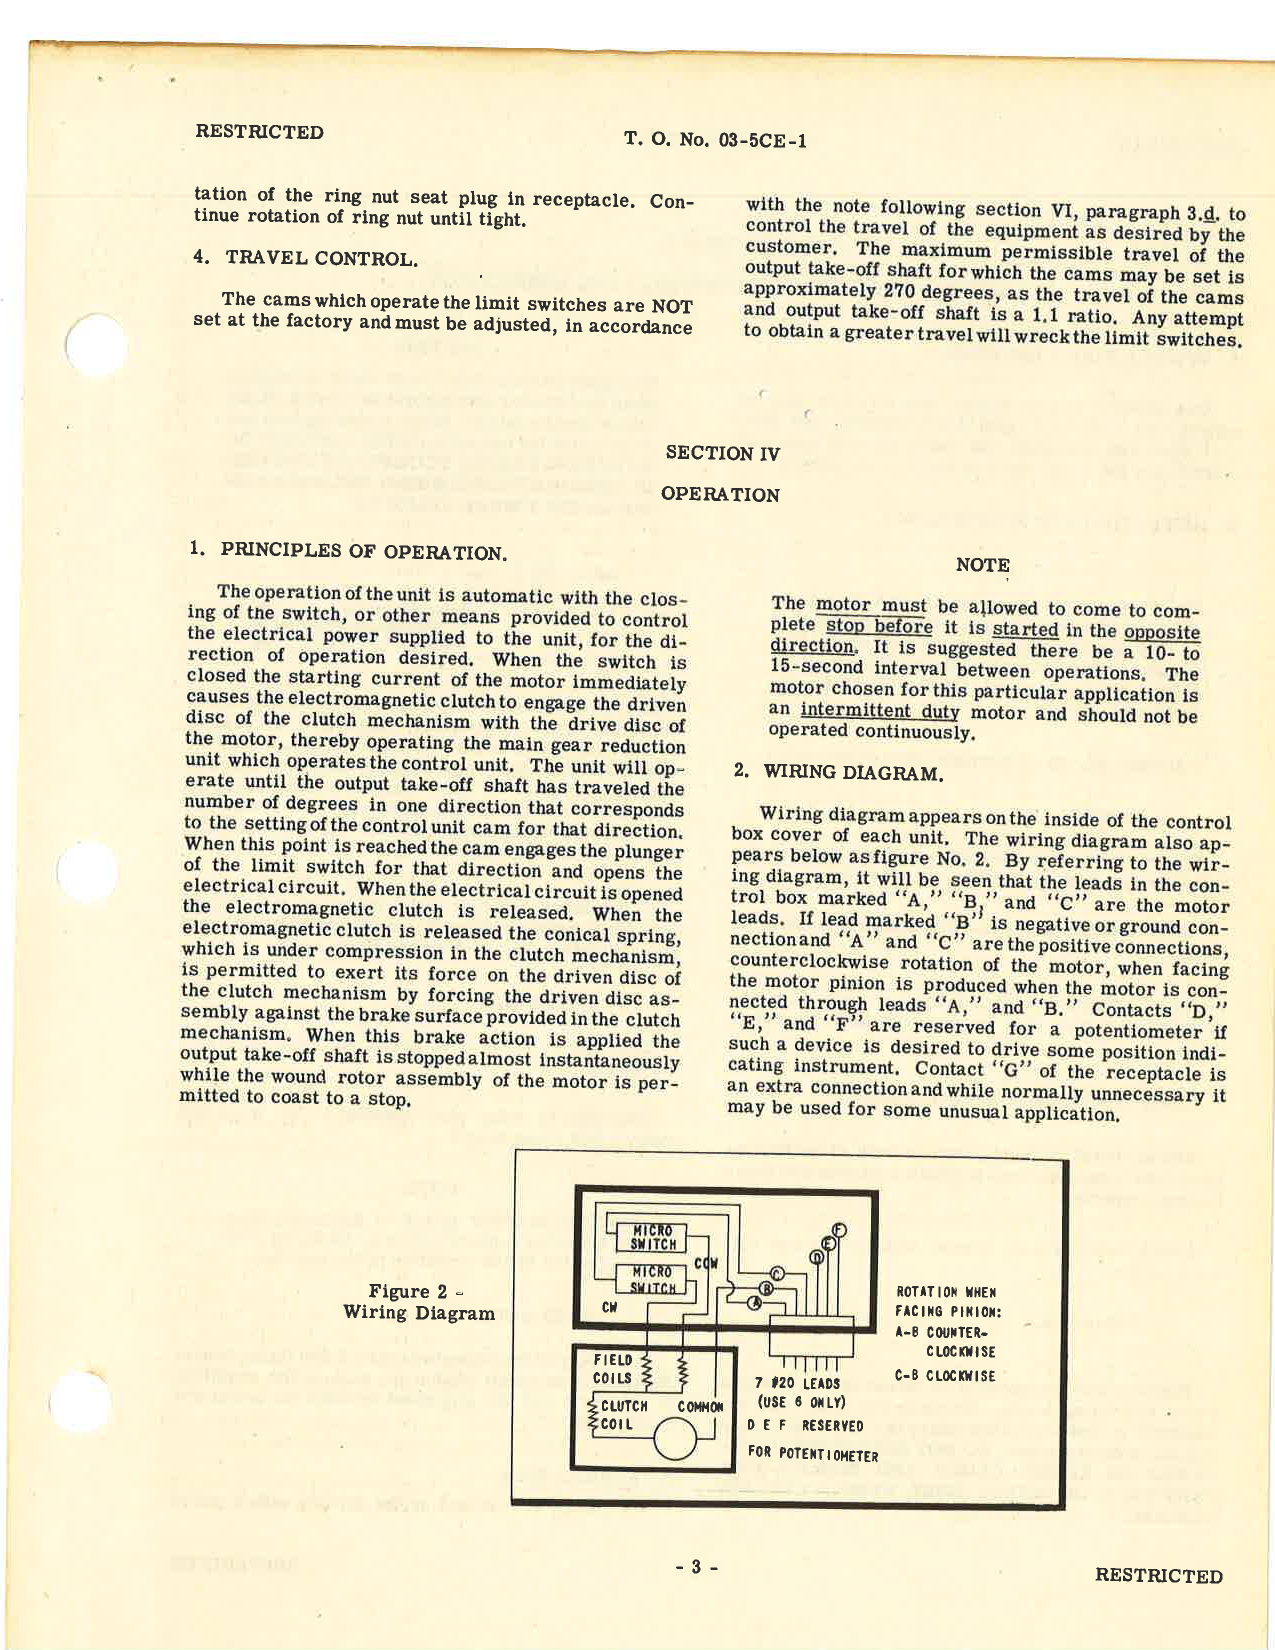 Sample page 7 from AirCorps Library document: Handbook of Instructions with Parts Catalog for Types CM-B111-A and B Control Drives